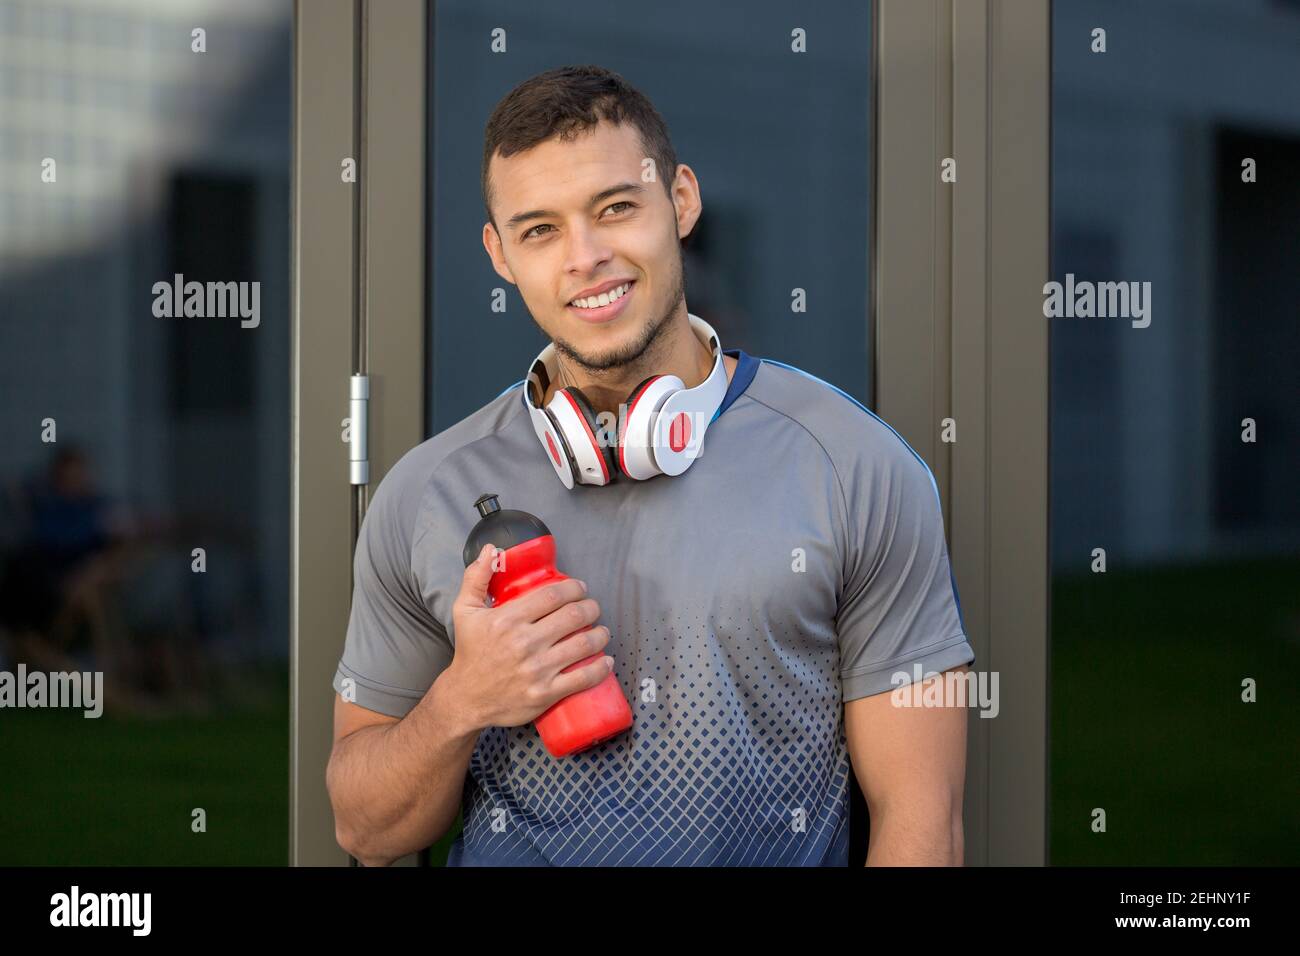 Smiling young latin man looking up runner outdoor sports fitness training outside Stock Photo